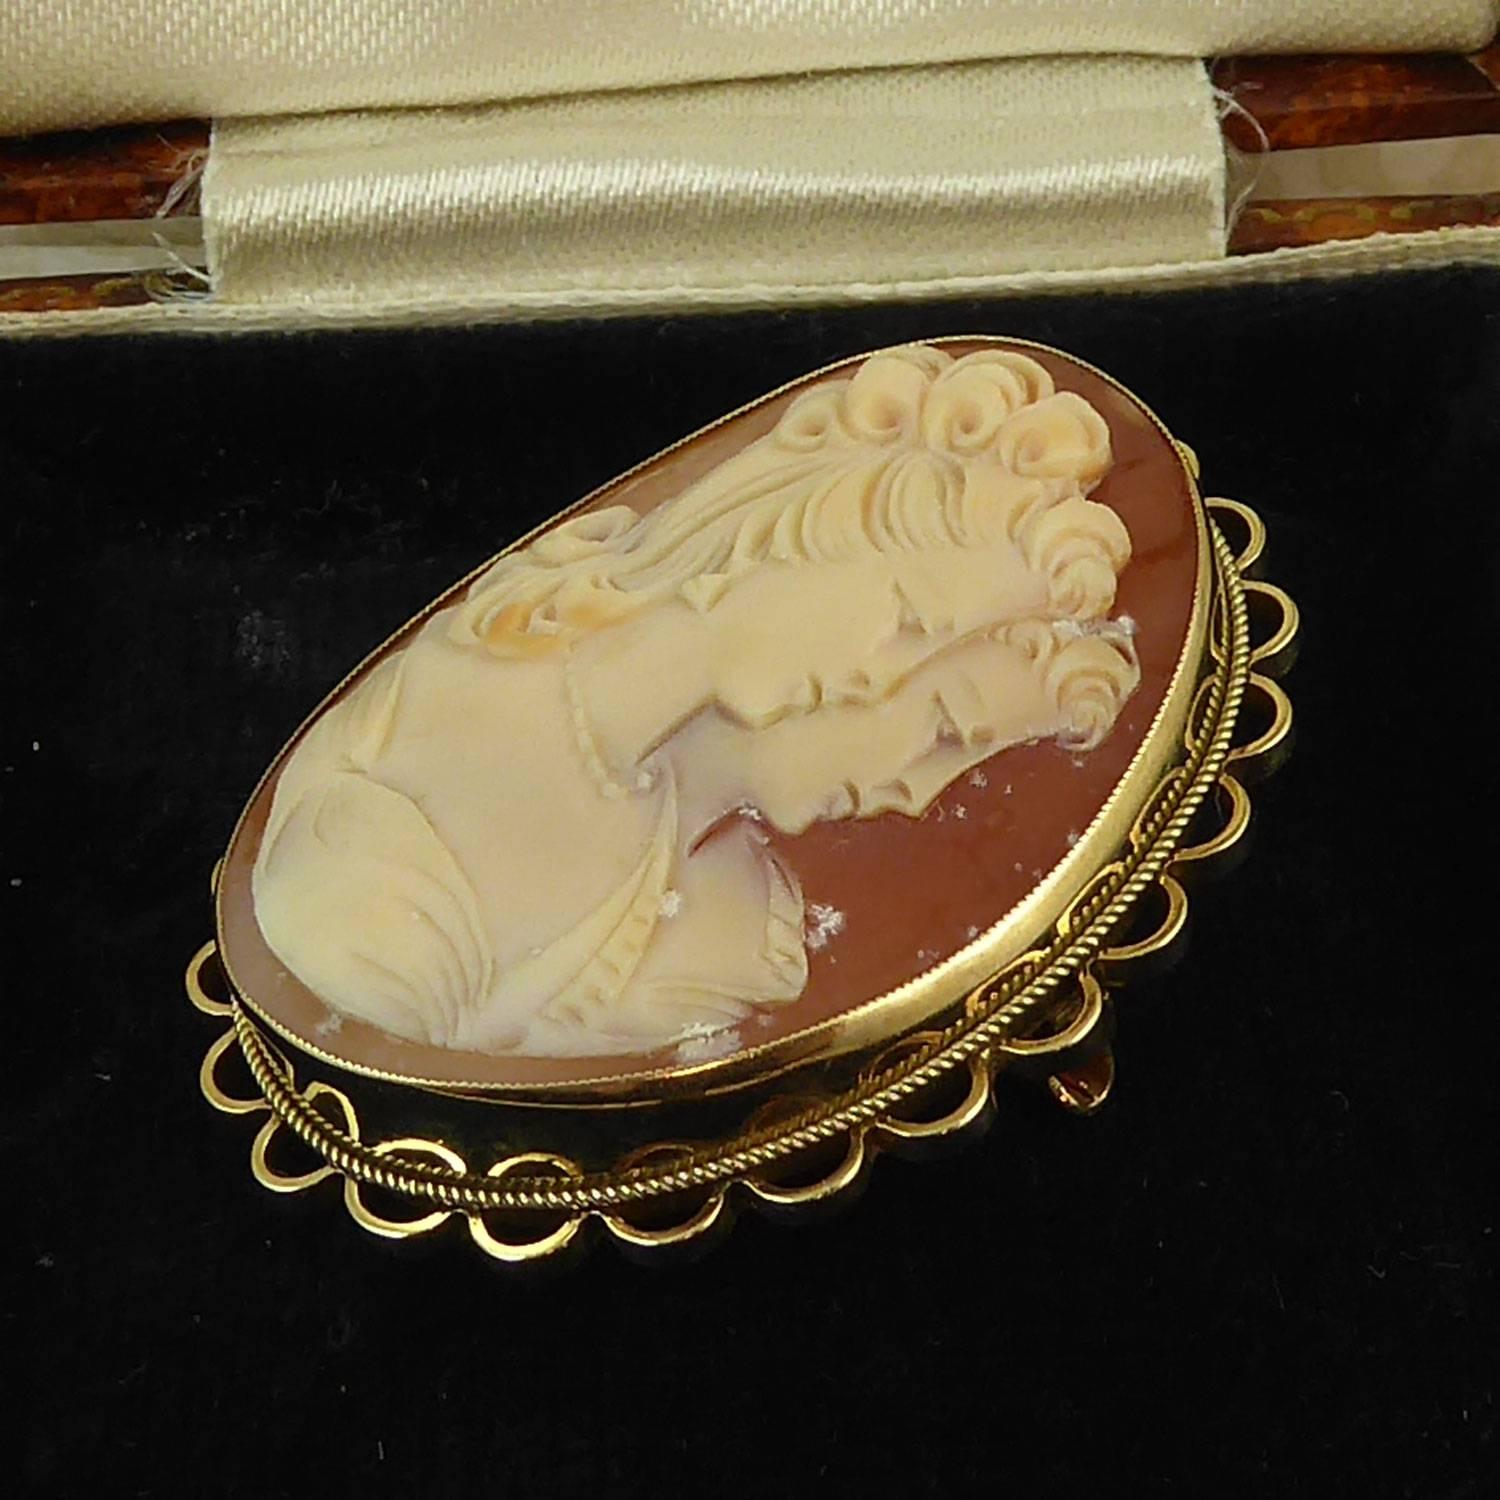 A recent vintage carved shell cameo depicting a classically carved young woman with reflection.  The cameo is very nicely carved with an elaborate hairstyle, jewellery and dress.  The cameo is mounted in a plain yellow gold band with a fine rope